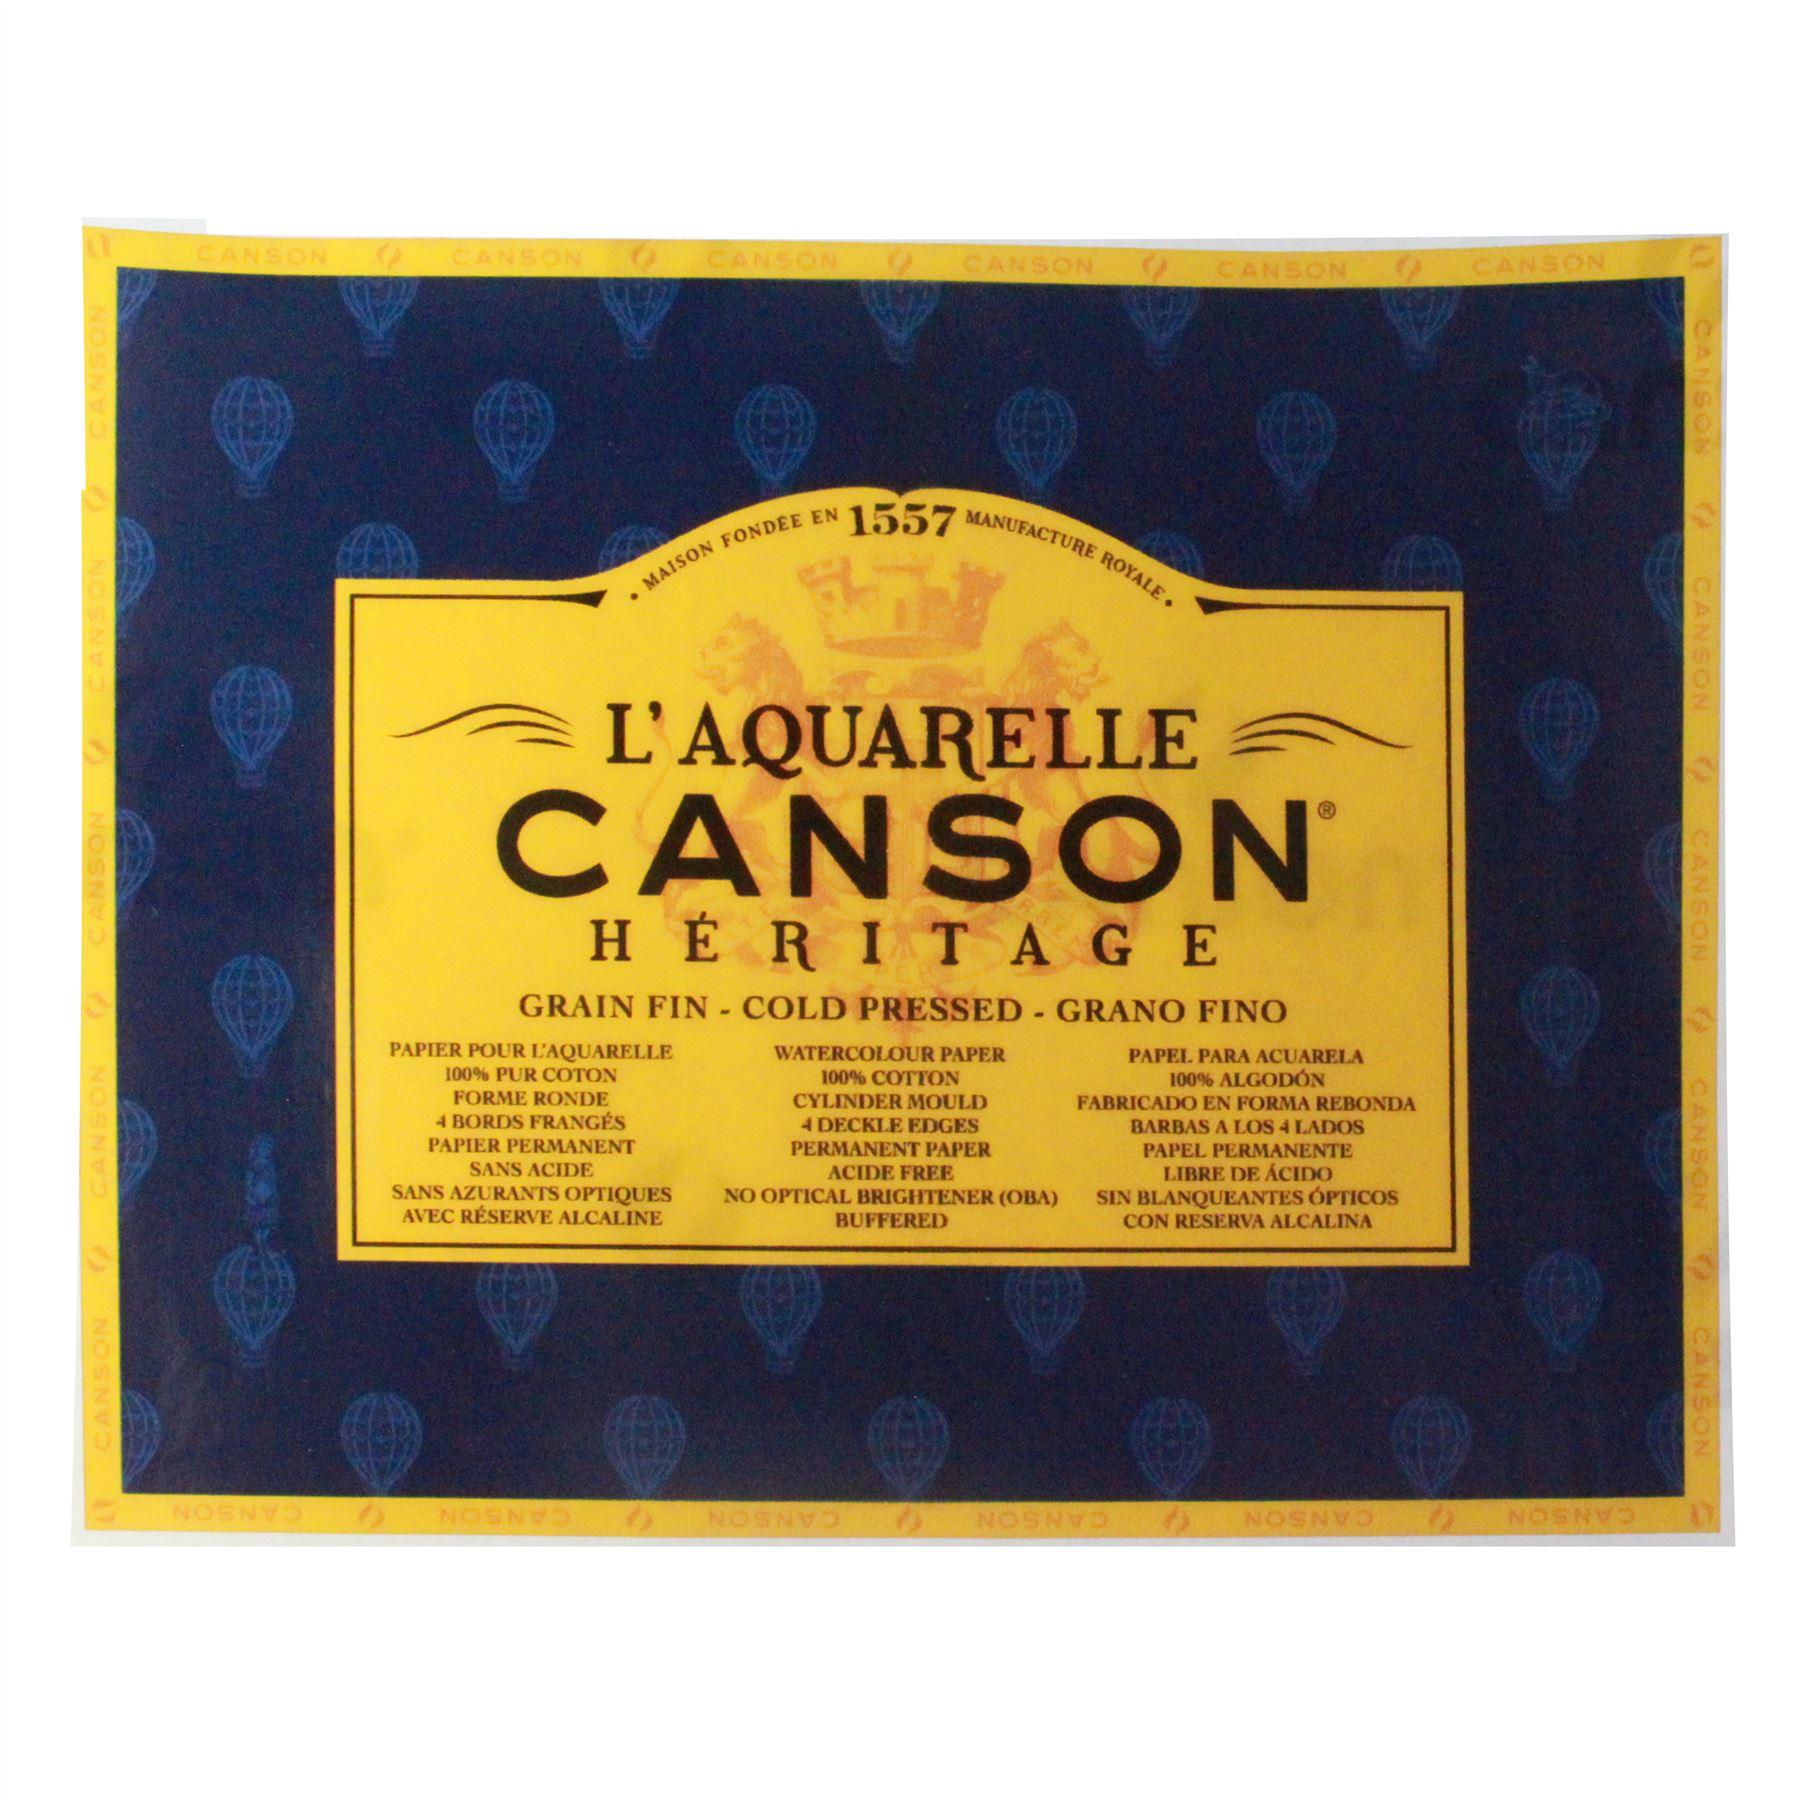 Canson L'Aquarelle Heritage watercolour paper sheets of cold pressed 300 GSM 140lb